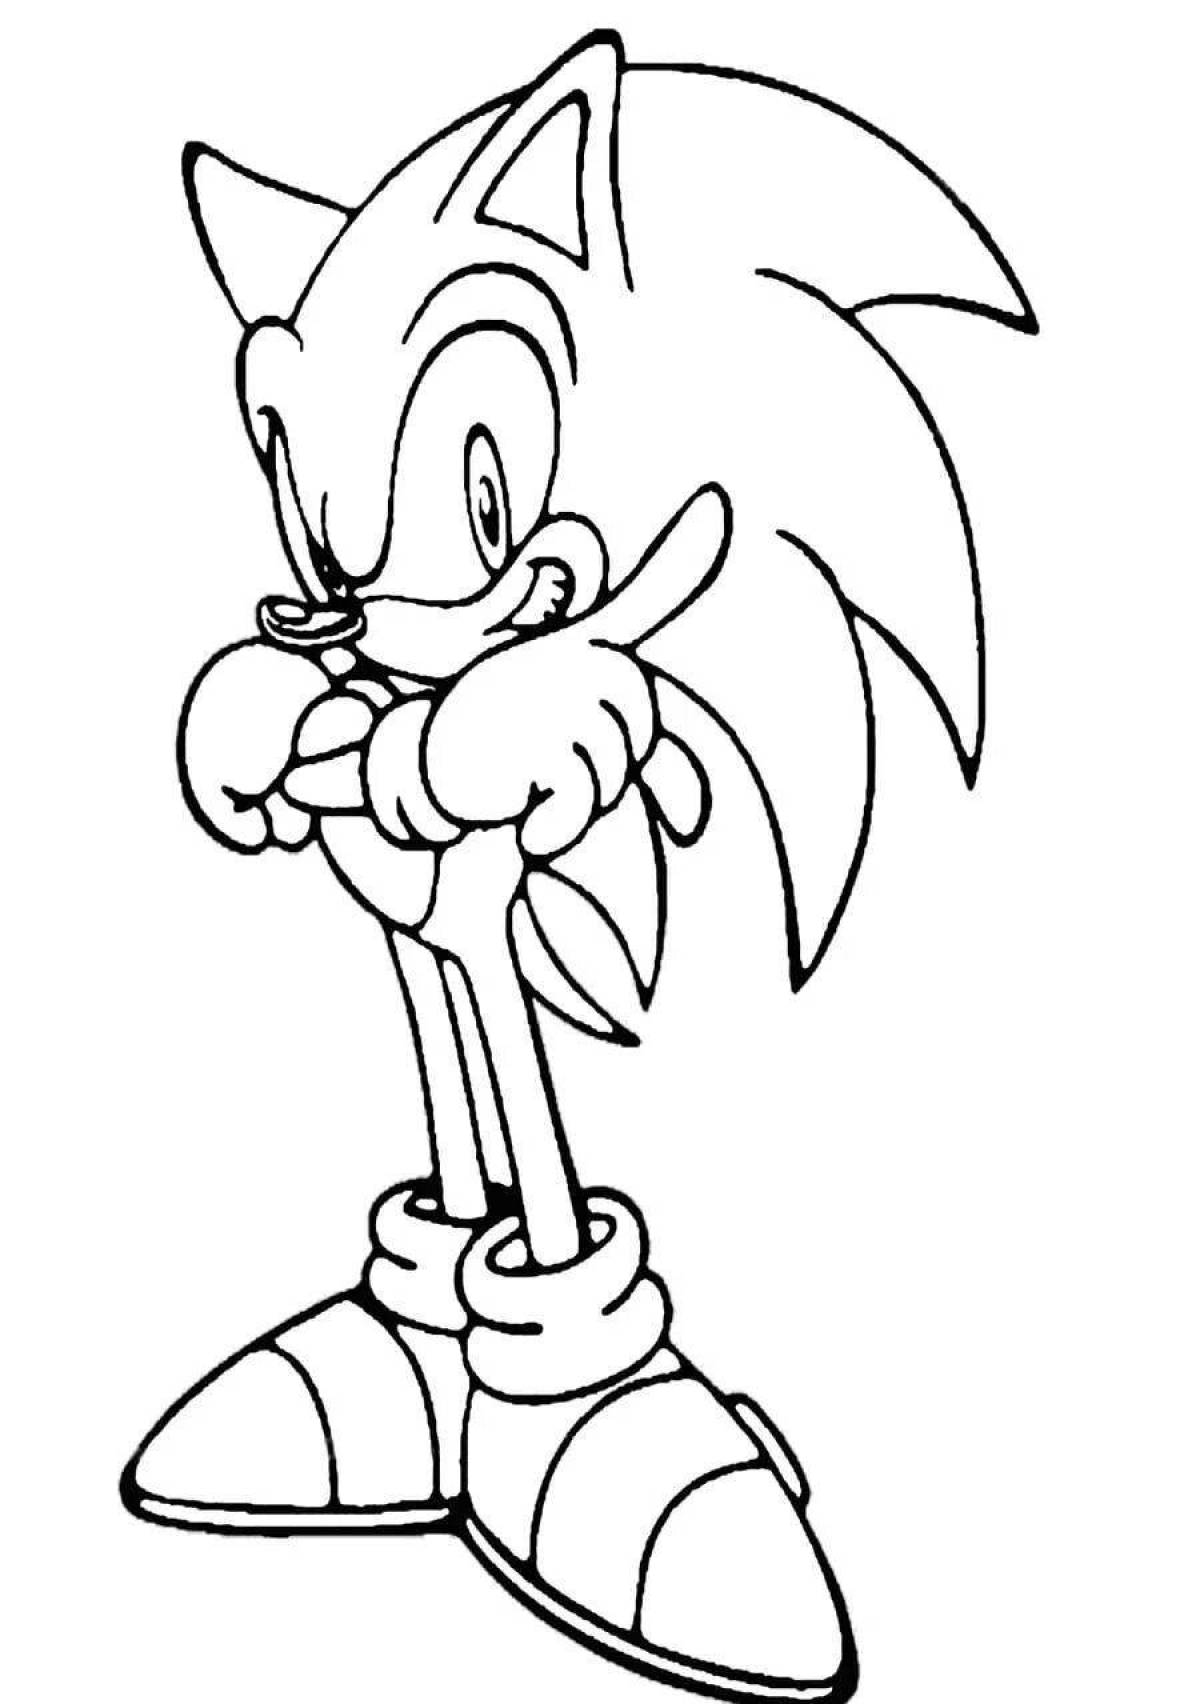 Bright sonic coloring